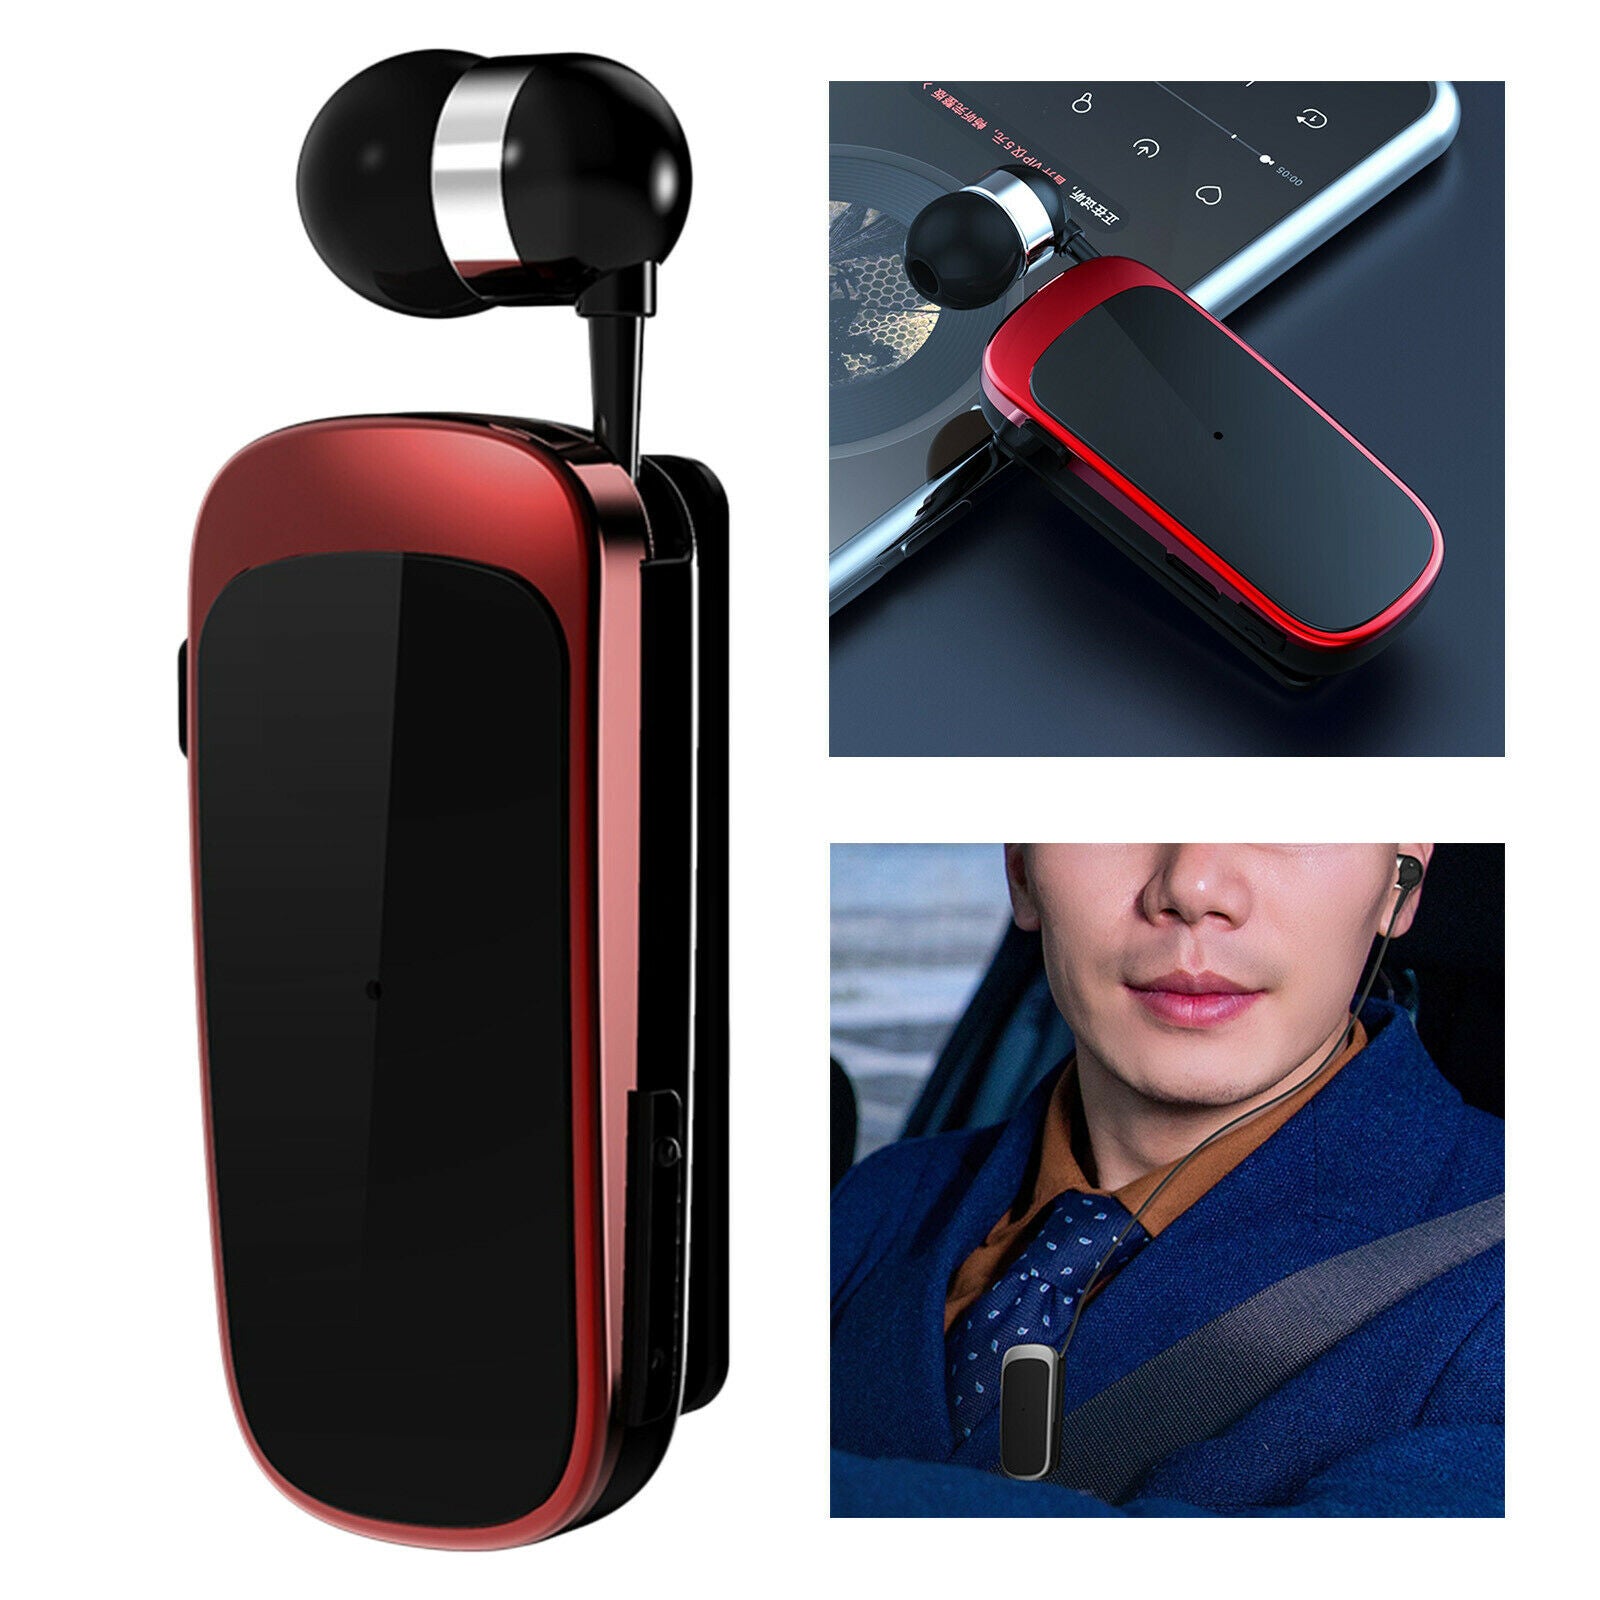 Fineblue K52 Bluetooth 4.0 Headset Driving Earphone Black Red with Box